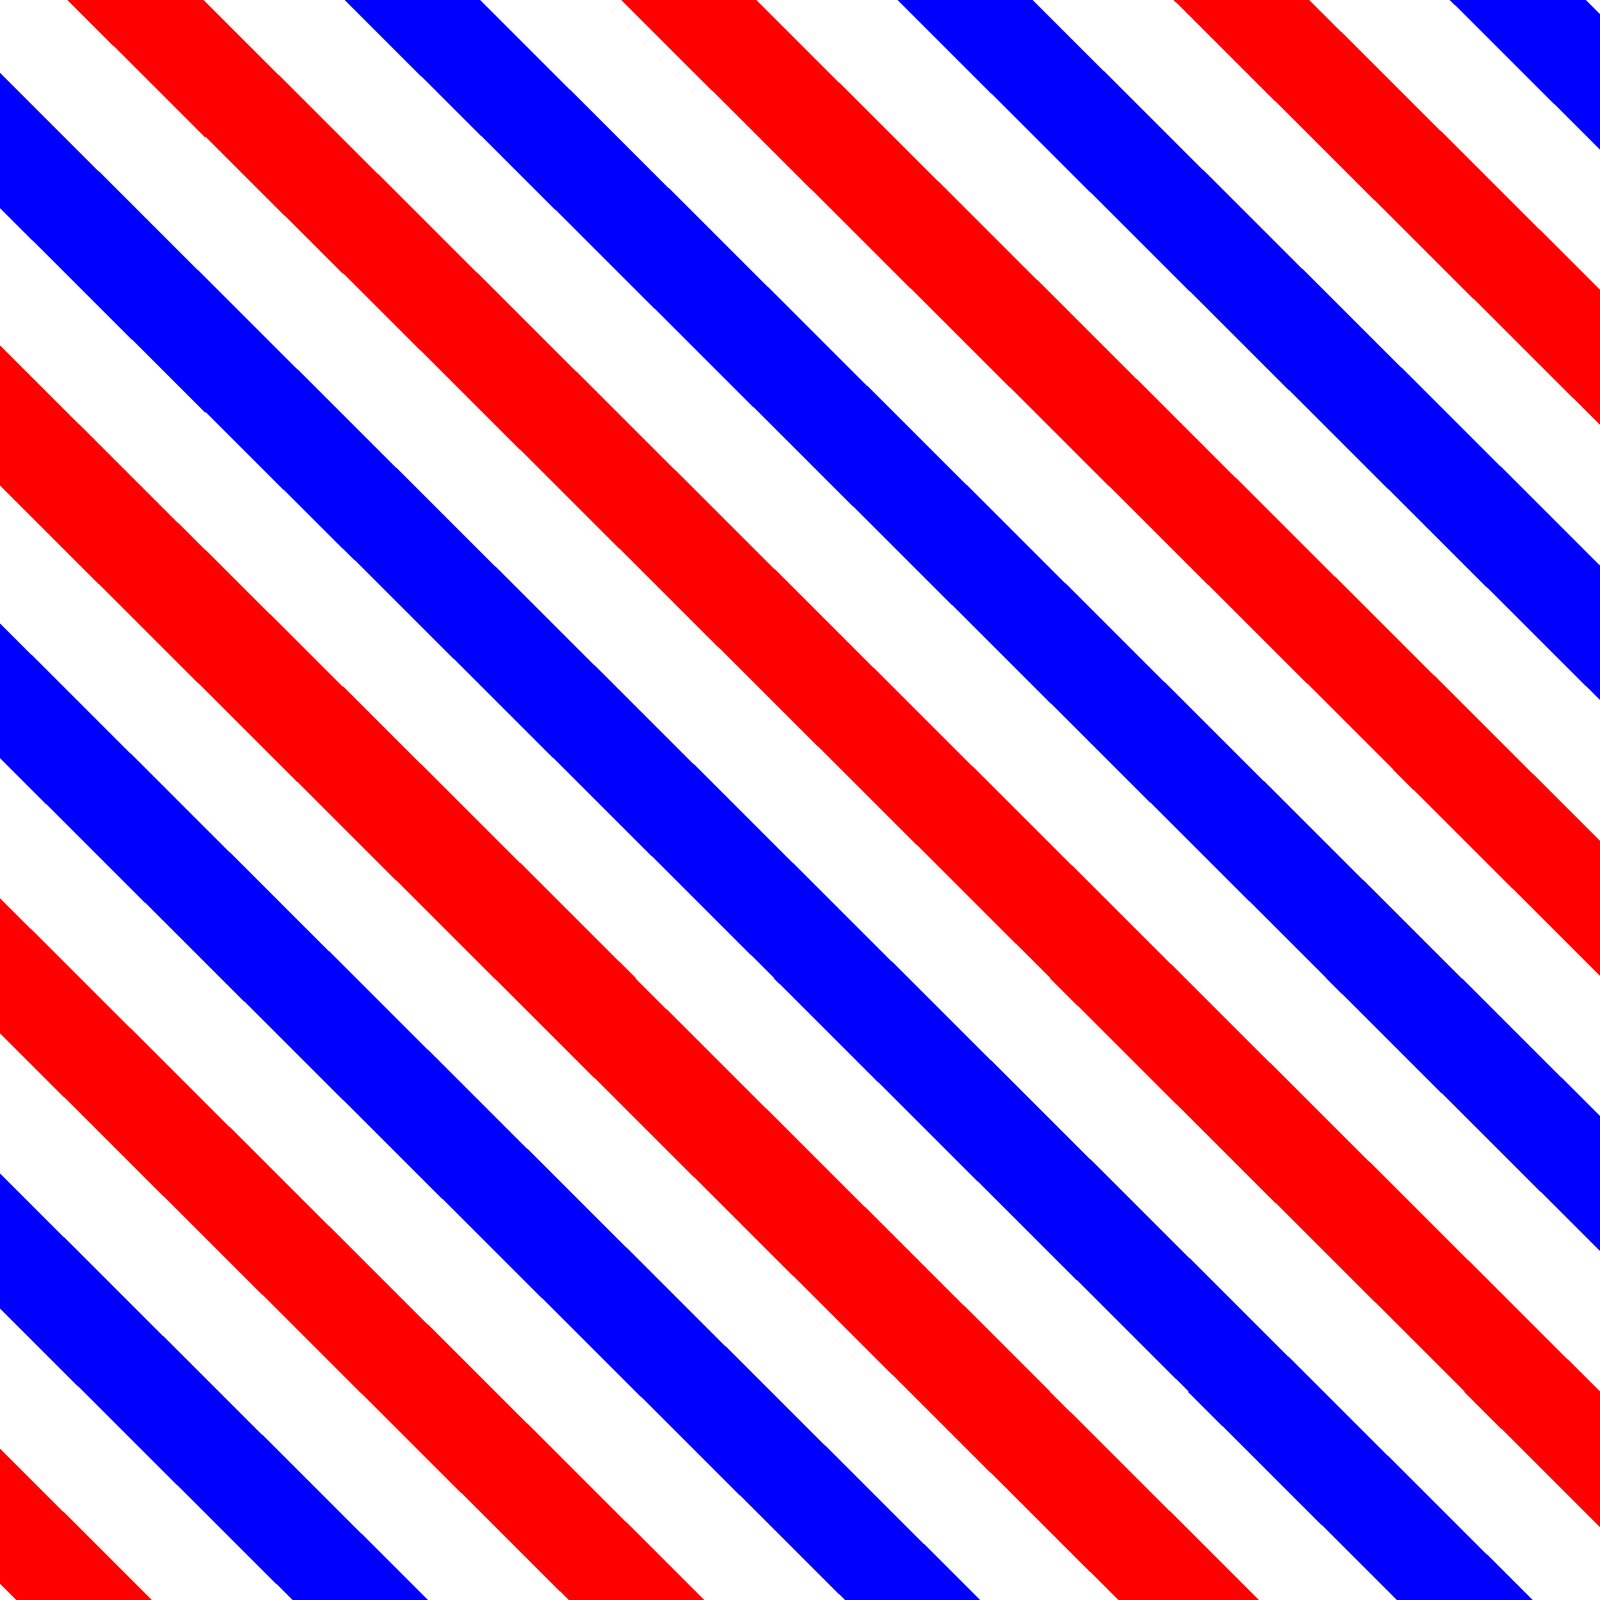 Red White and Blue Stripes Logo - Red and blue stripe Logos